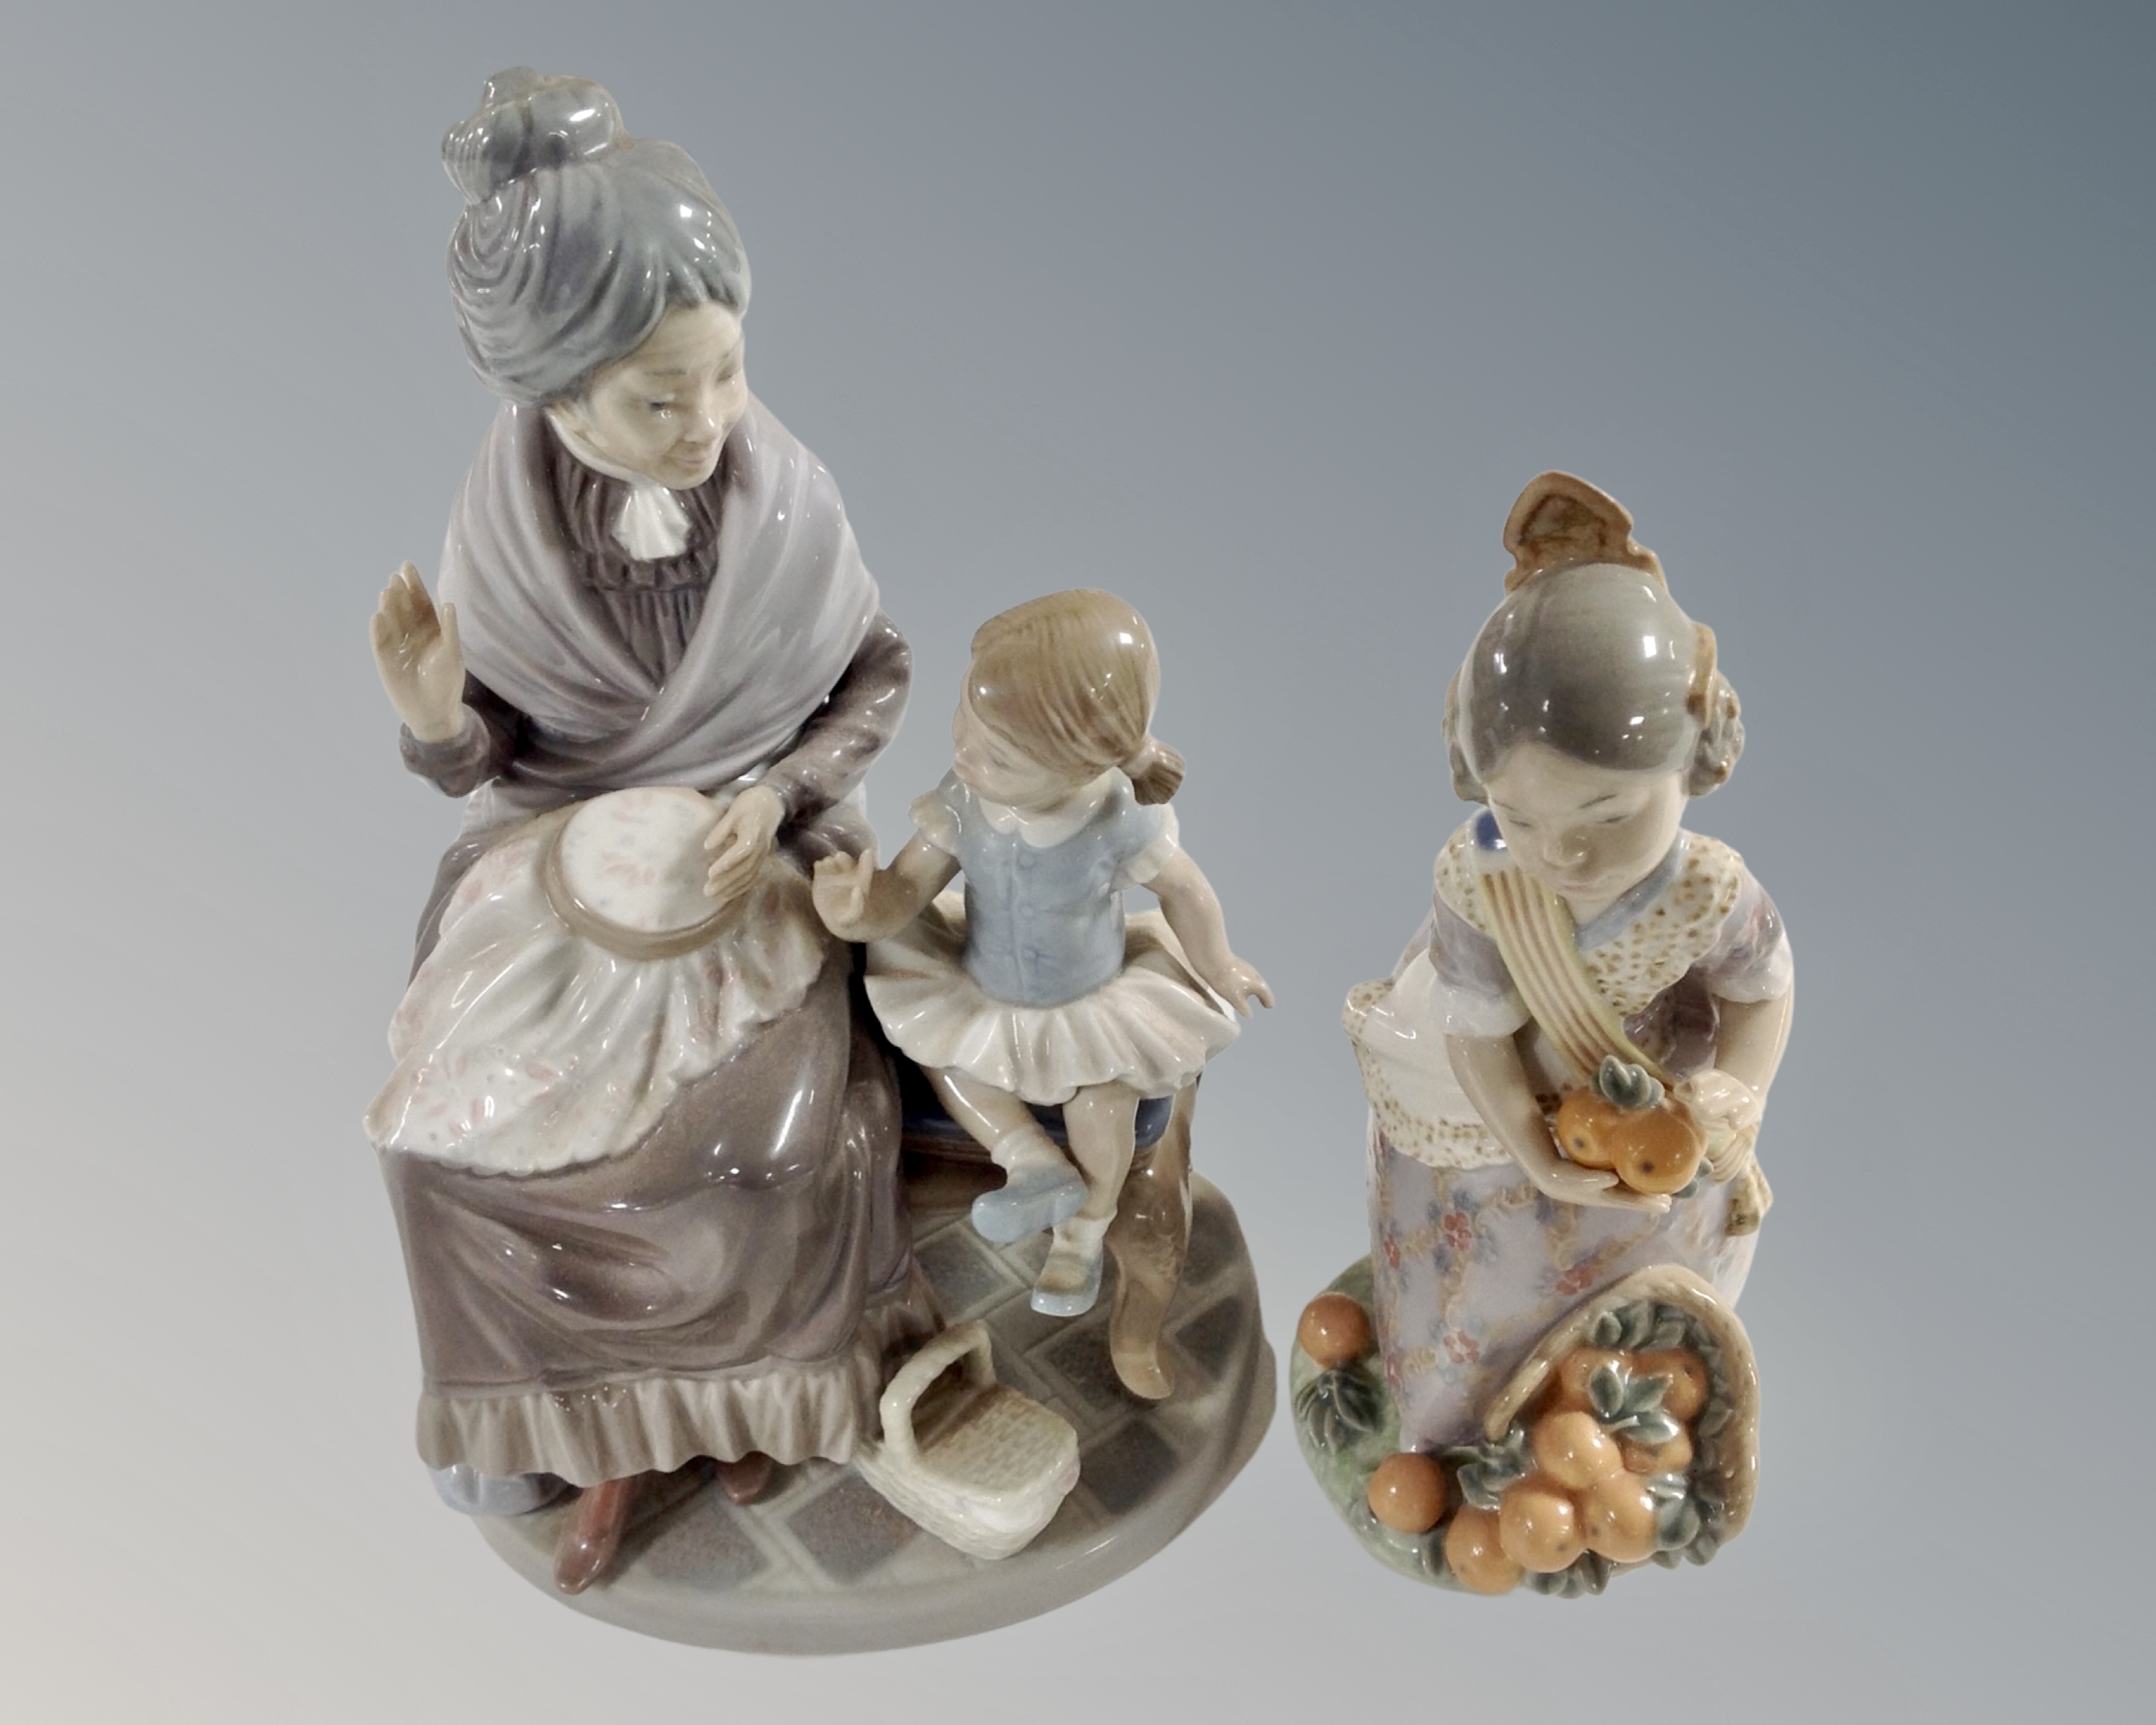 A Lladro figure Girl with Grandmother together with a further Lladro figure of a girl picking